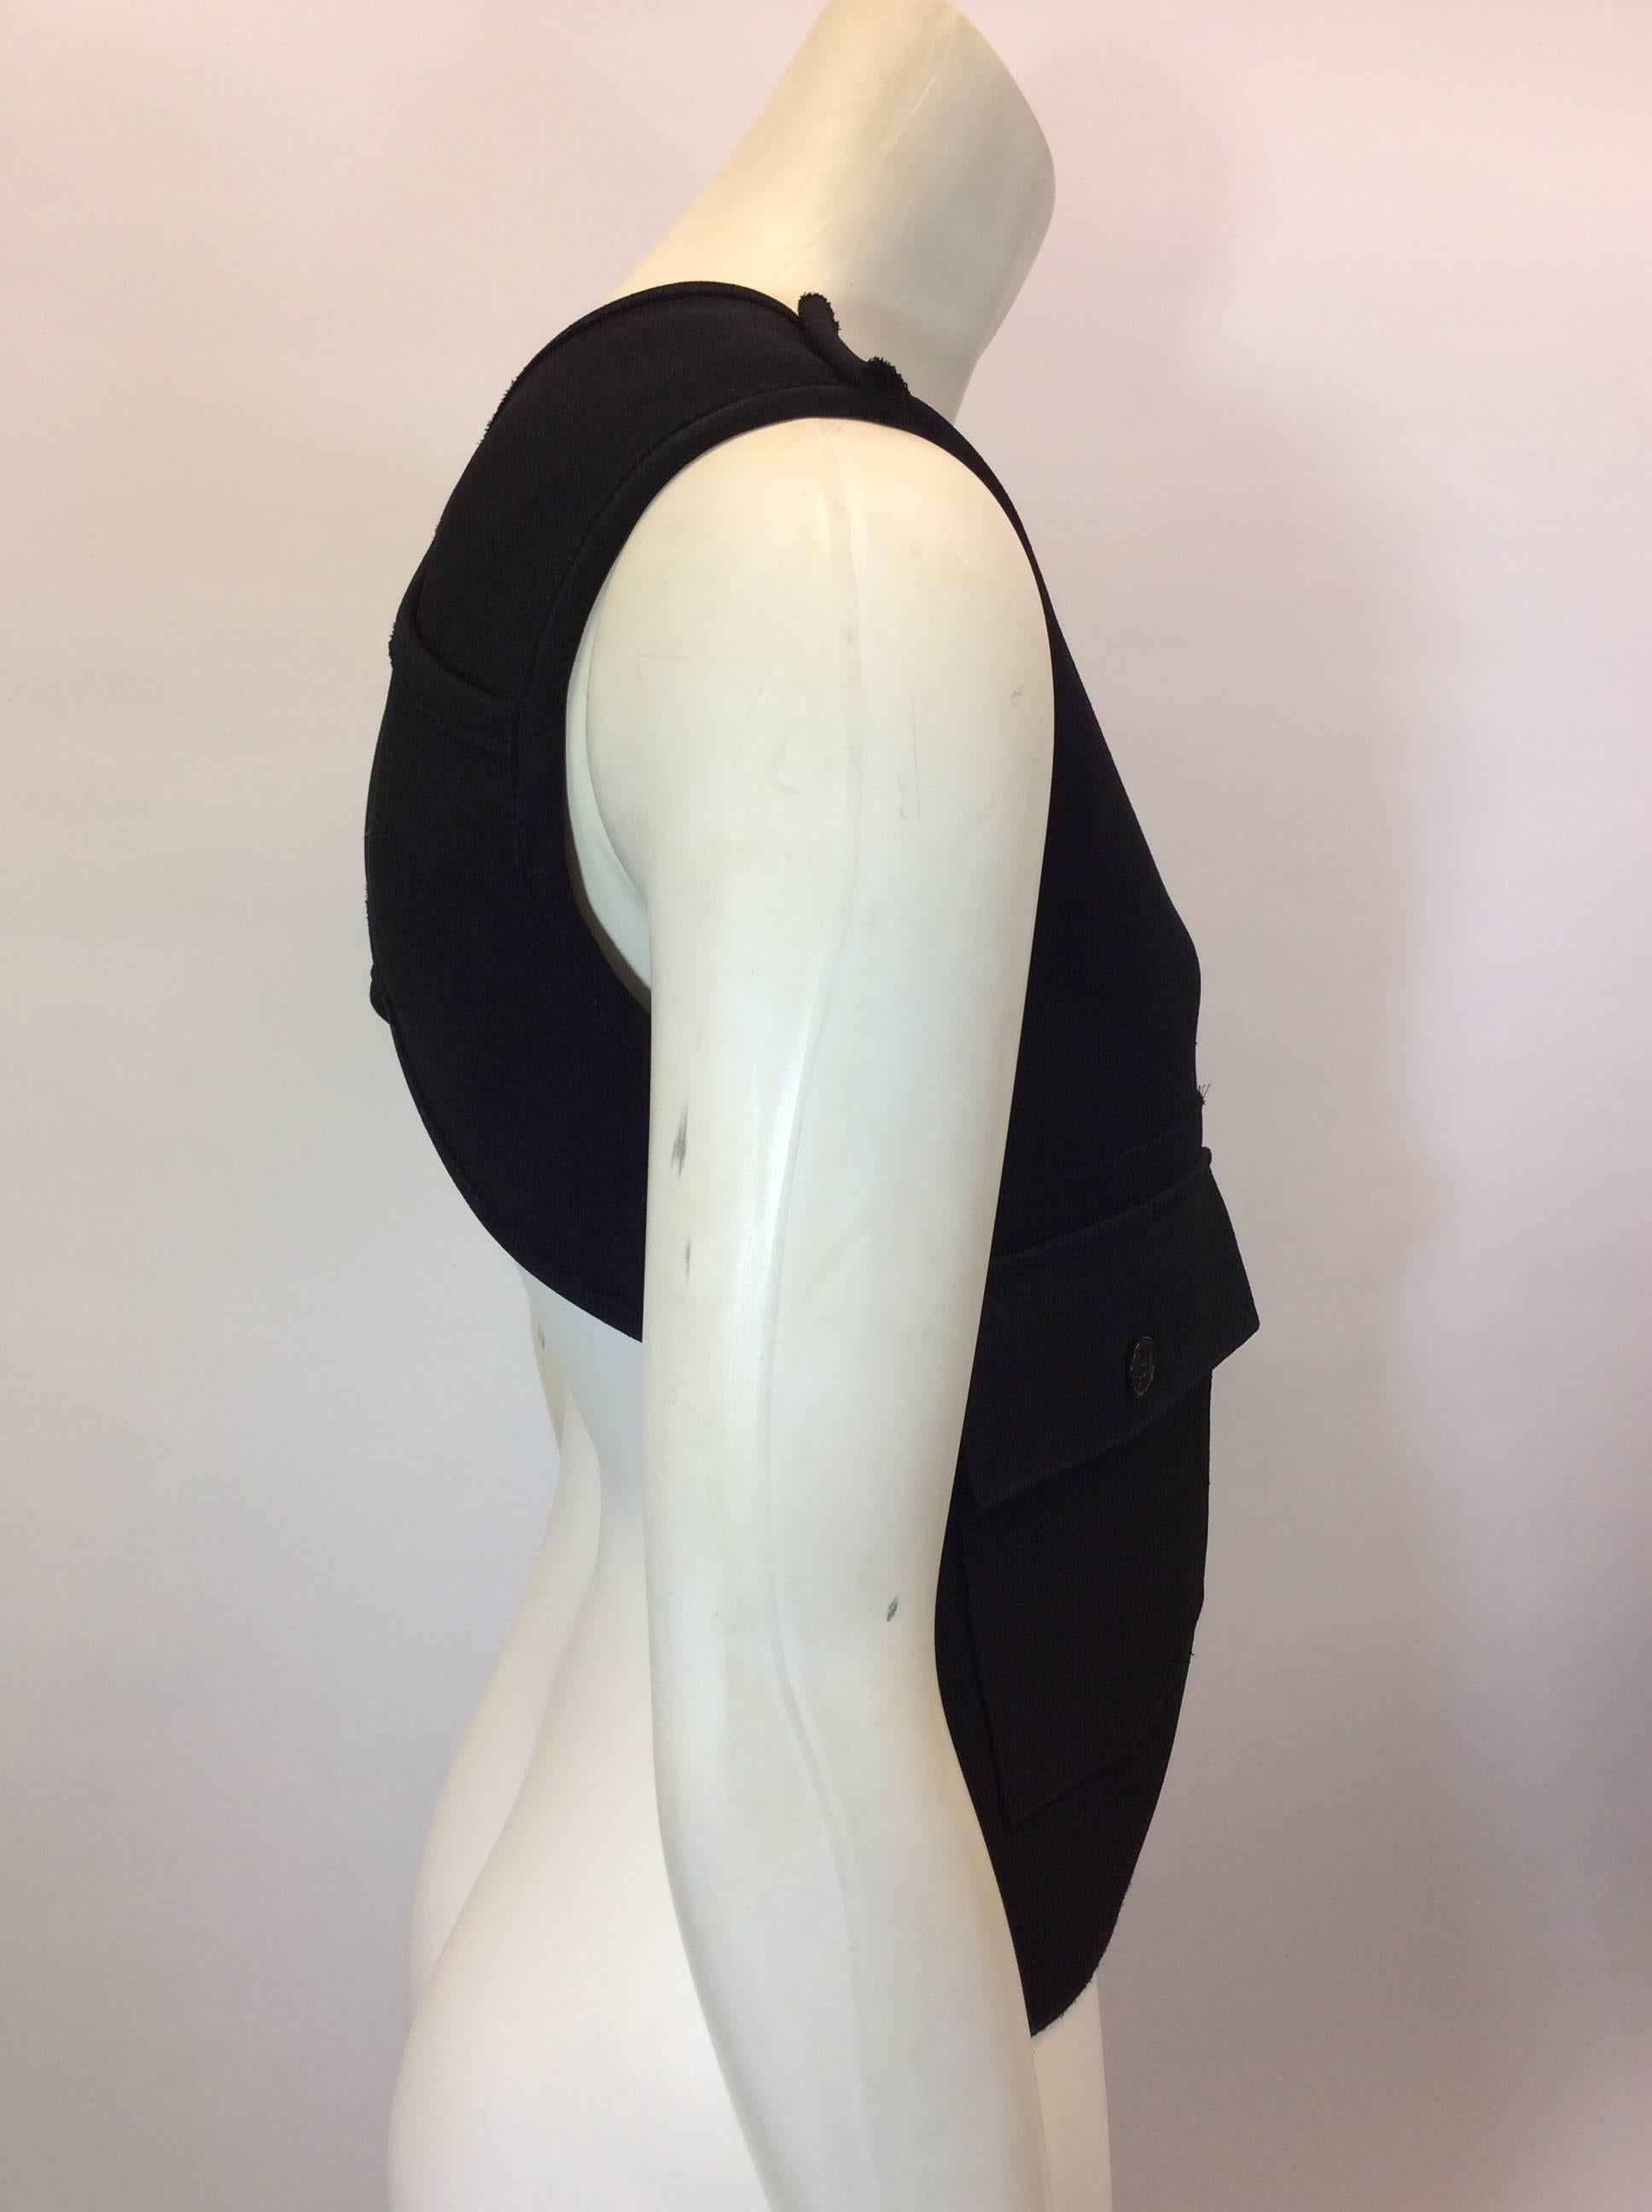 Victoria Beckham Black Cross Back Asymmetrical Top In Excellent Condition For Sale In Narberth, PA